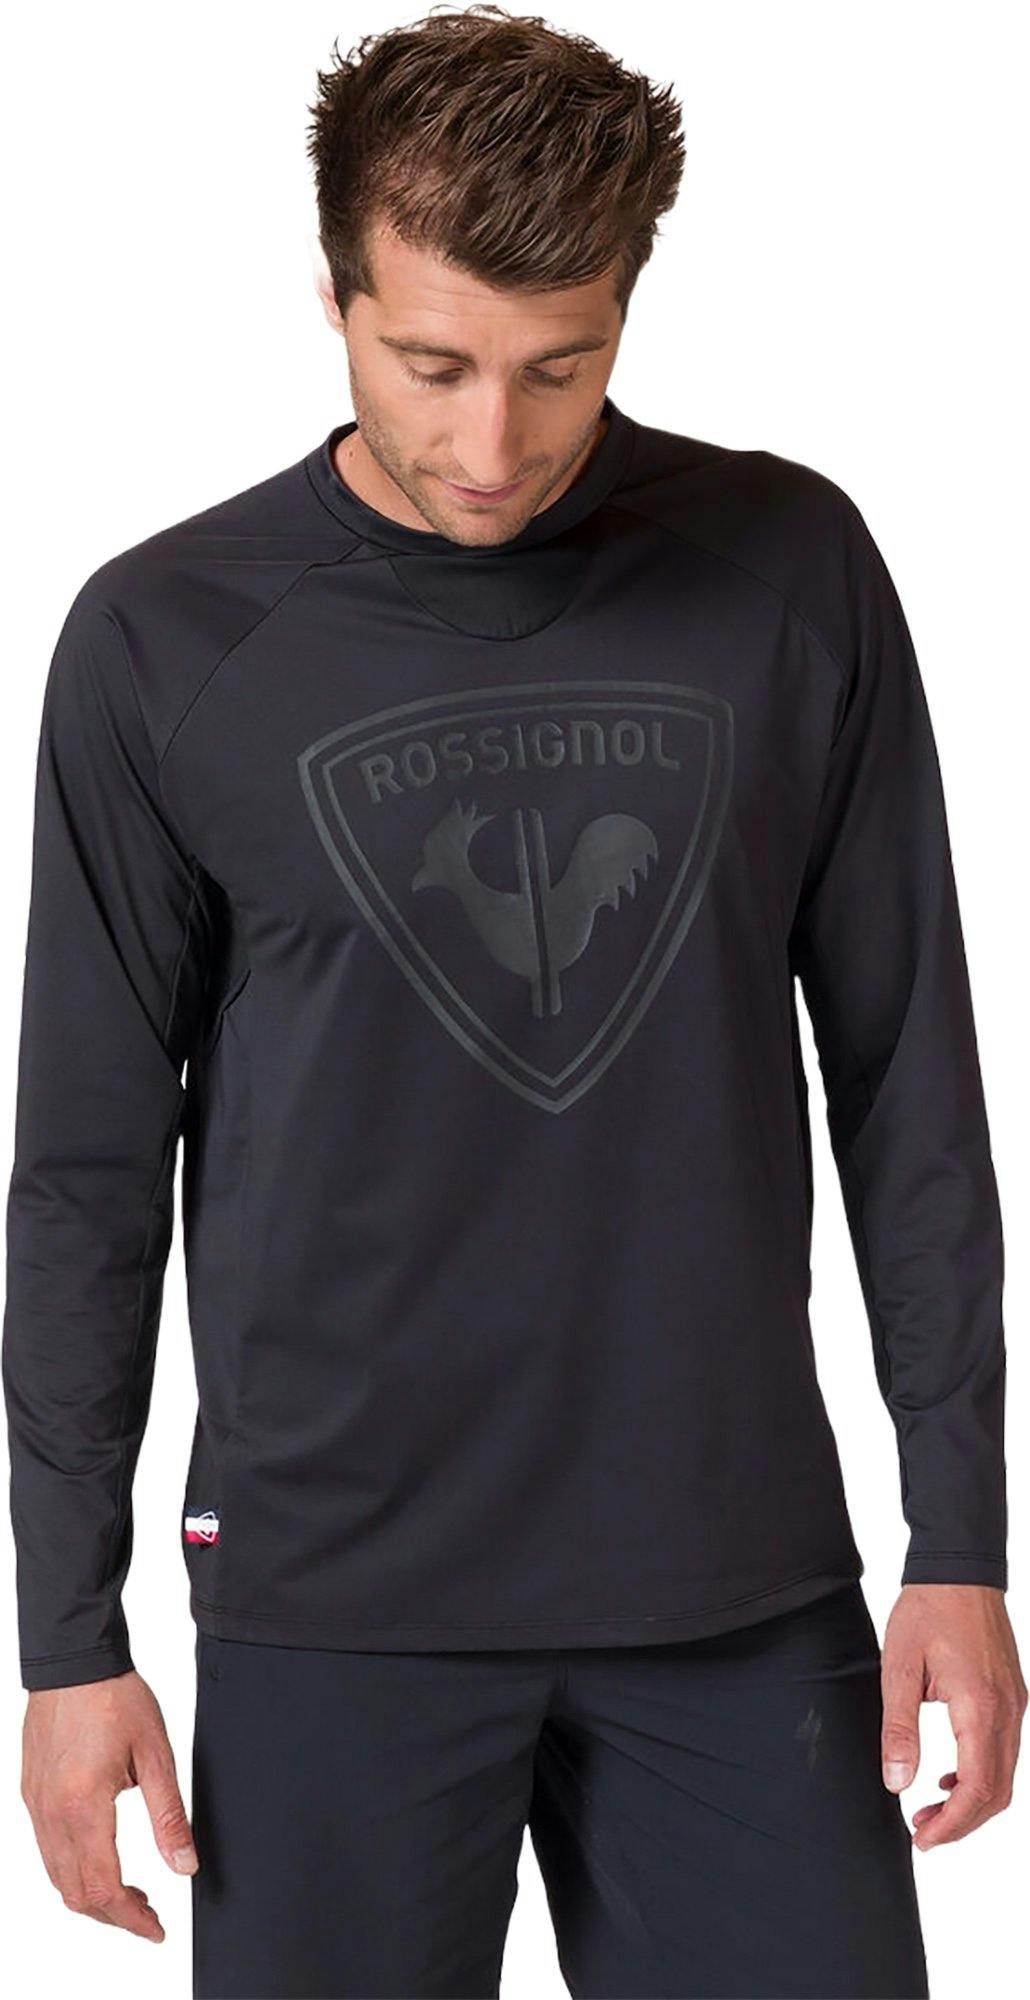 Product image for SKPR Long Sleeve Jersey - Men's